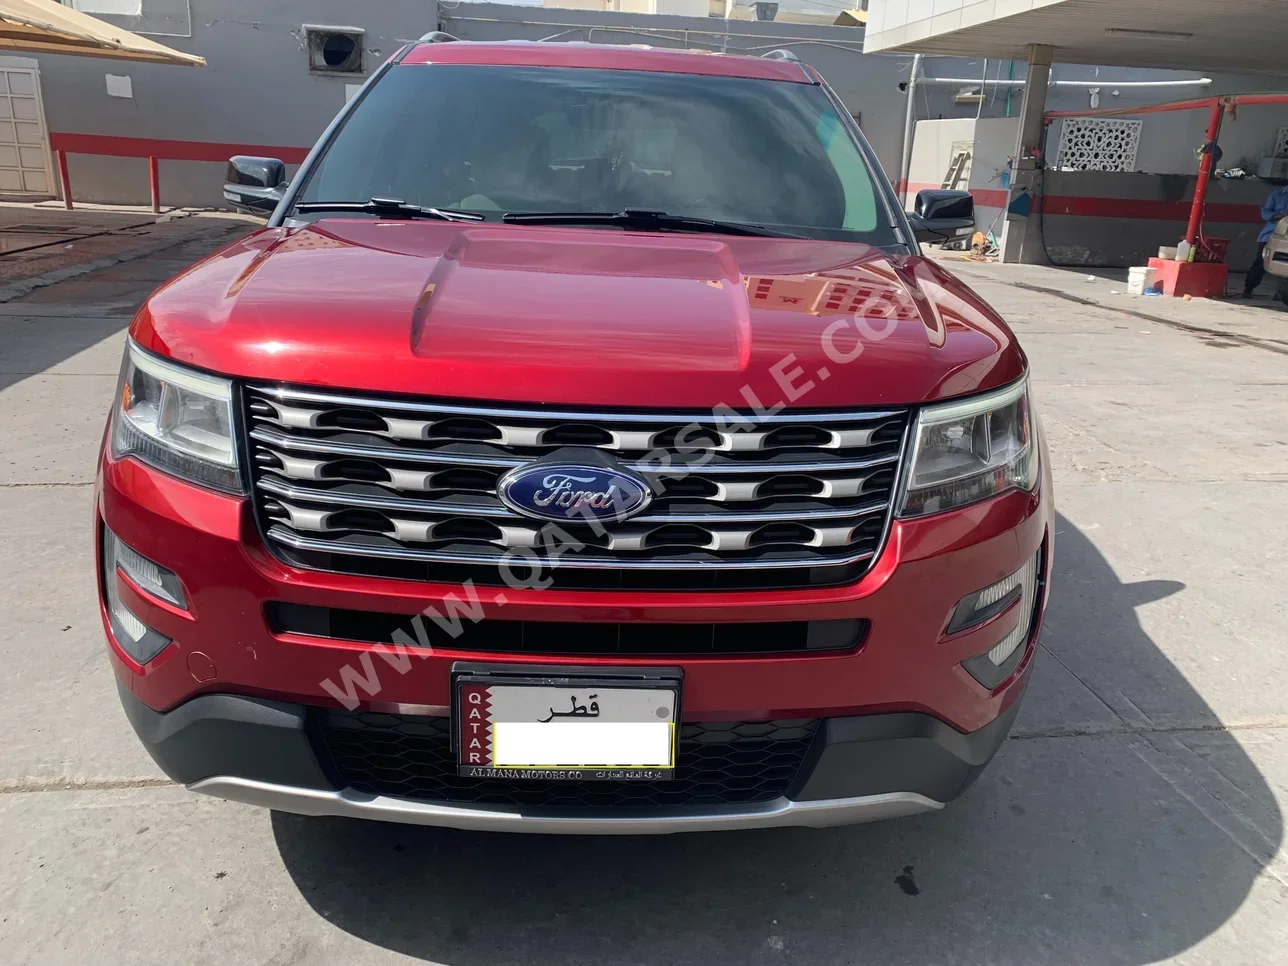 Ford  Explorer  XLT  2017  Automatic  93,000 Km  6 Cylinder  Four Wheel Drive (4WD)  SUV  Red